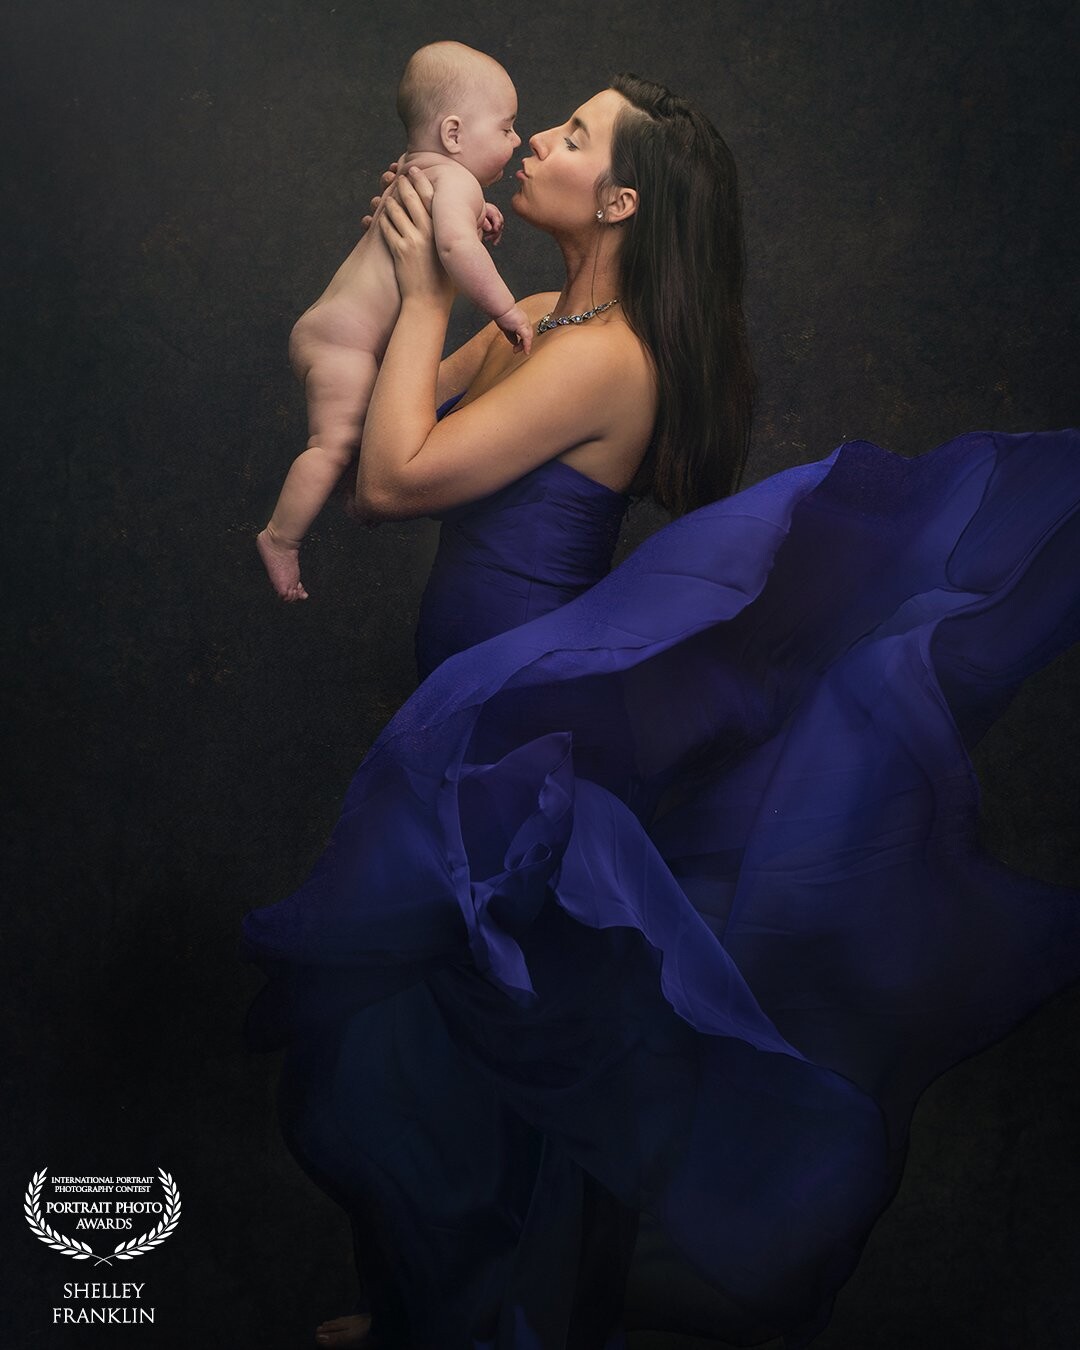 I wanted to create artwork for this new mother;  and an image that shows a glamorous side of motherhood.   I think a lot of new moms can appreciate an image where they look gorgeous during a time they otherwise may not feel as beautiful as they once felt, simply because all of their energy and time is being devoted to a new little person who needs them.  Every  mom deserves an image to look back on that shows how happy AND gorgeous they were during this amazing time of life.